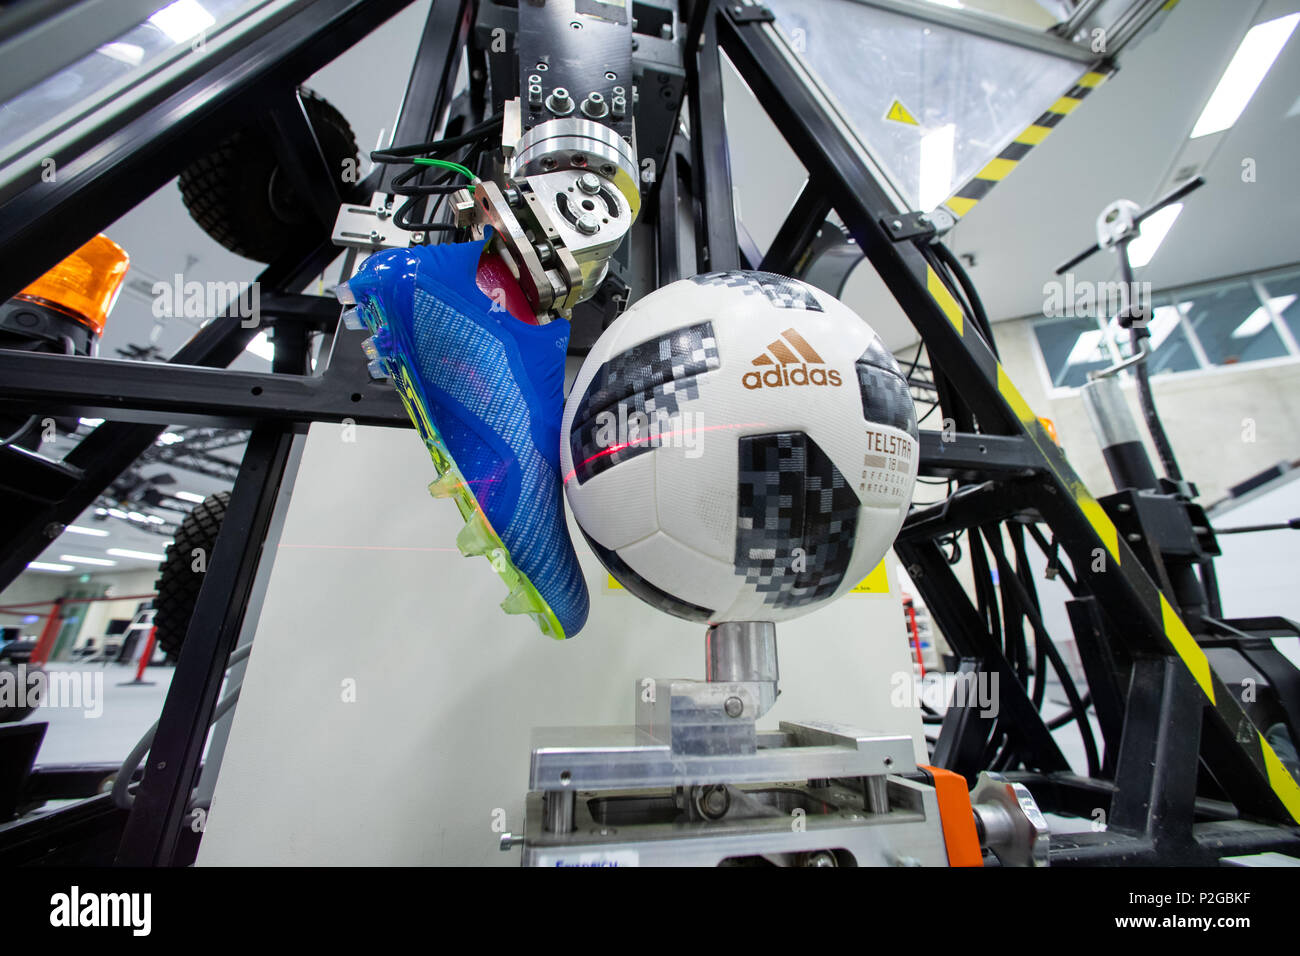 13 June 2018, Germany, Herzogenaurach: The 'Telstar 18', the official ball  of this year's FIFA World Cup in Russia, sits in front of the shoe of a  kicking robot at the research